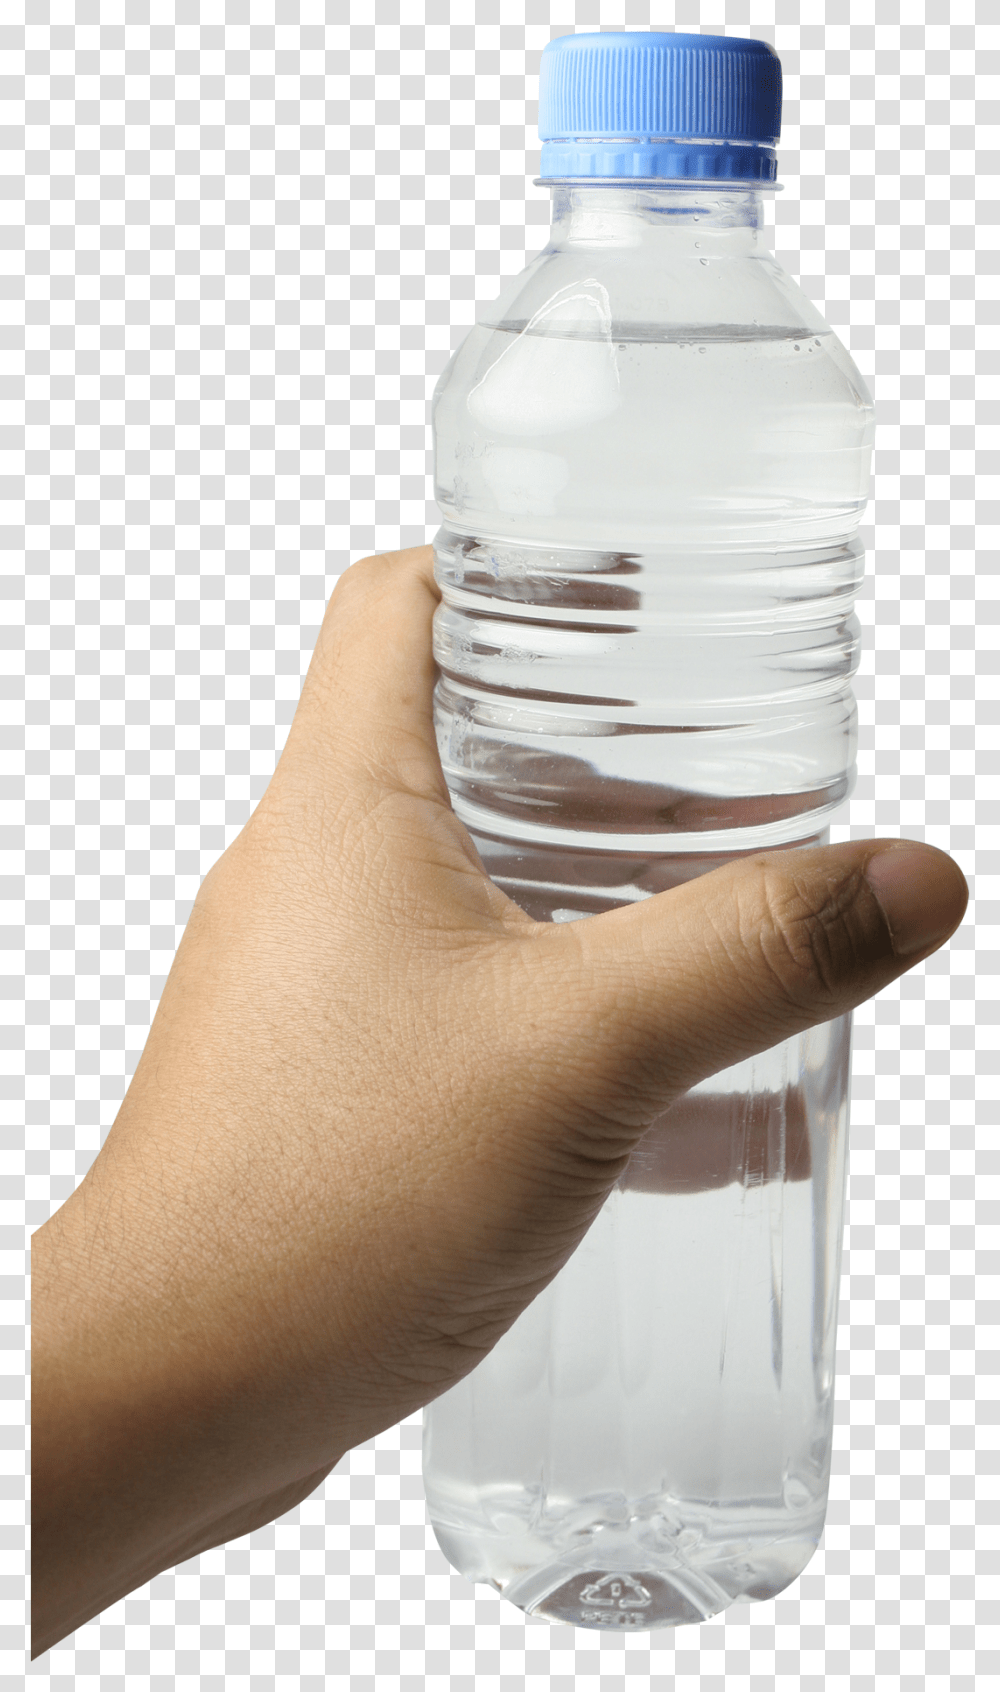 Hand With Water Bottle Image Hand With Bottle, Person, Human, Contact Lens, Jar Transparent Png